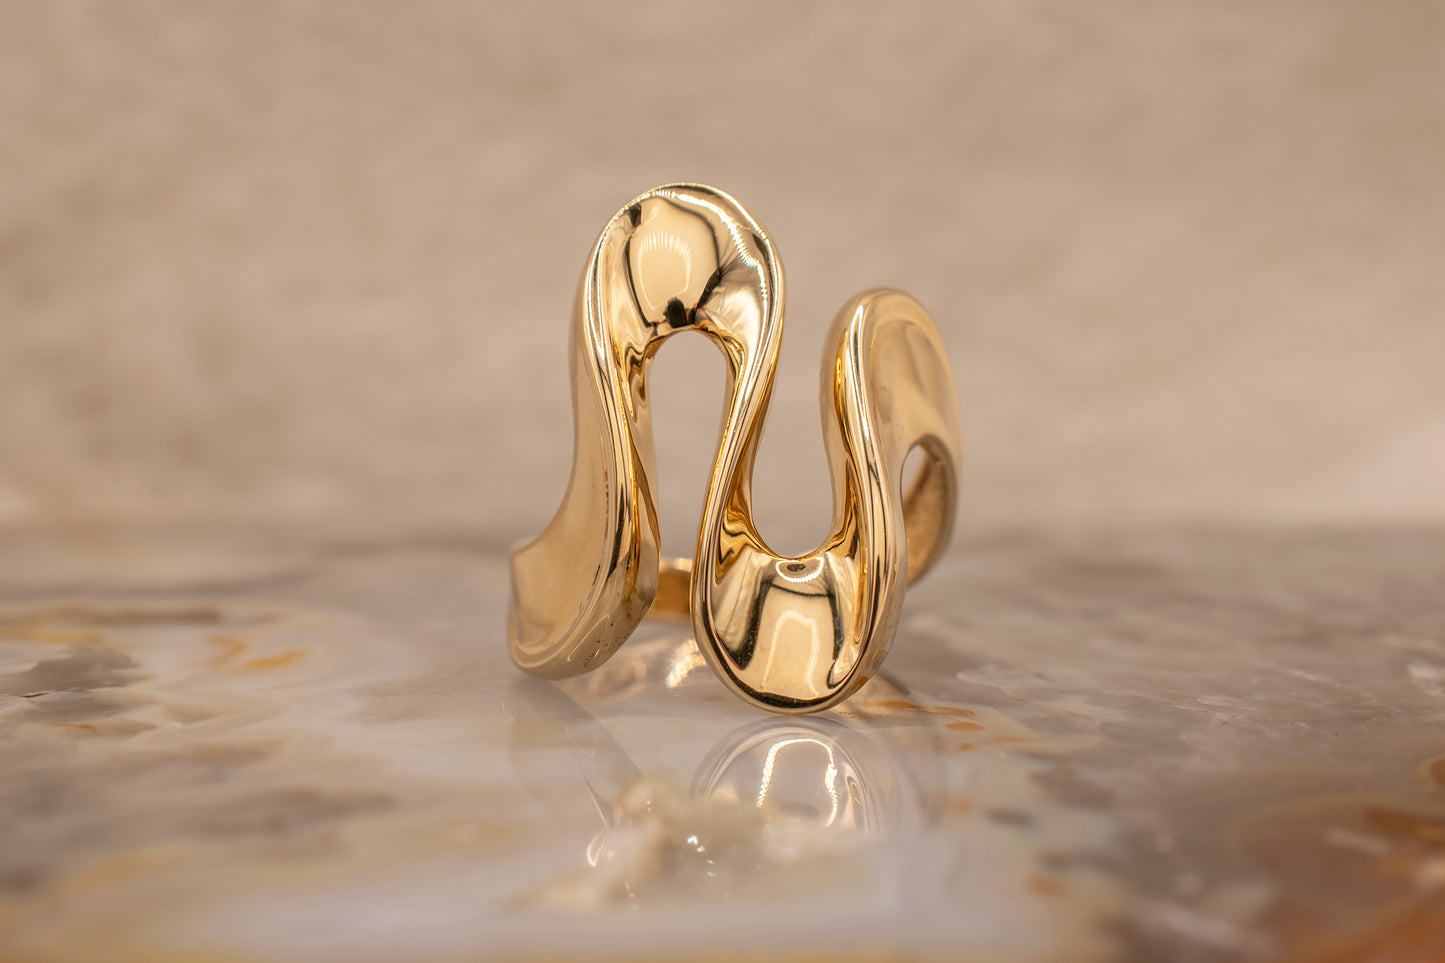 Vintage Estate Mid-Century Inspired 14k Yellow Gold Abstract Wave Design Ring Size 8